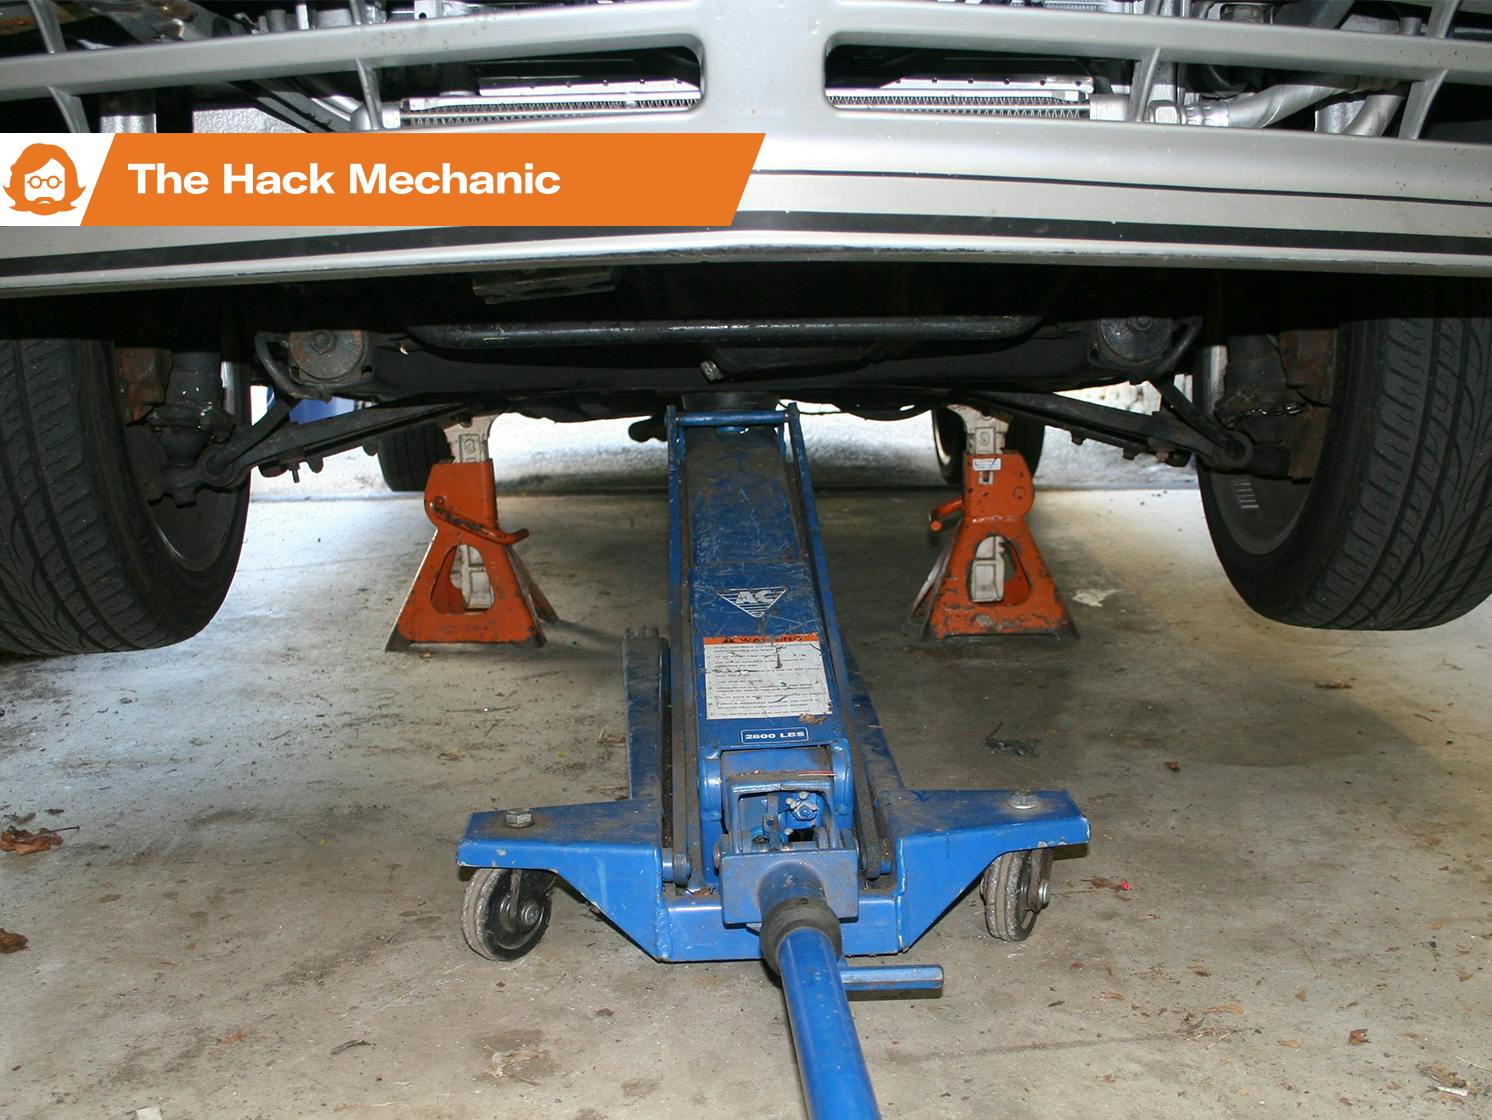 How to Extend the Life of Your Car: 13 Steps (with Pictures)